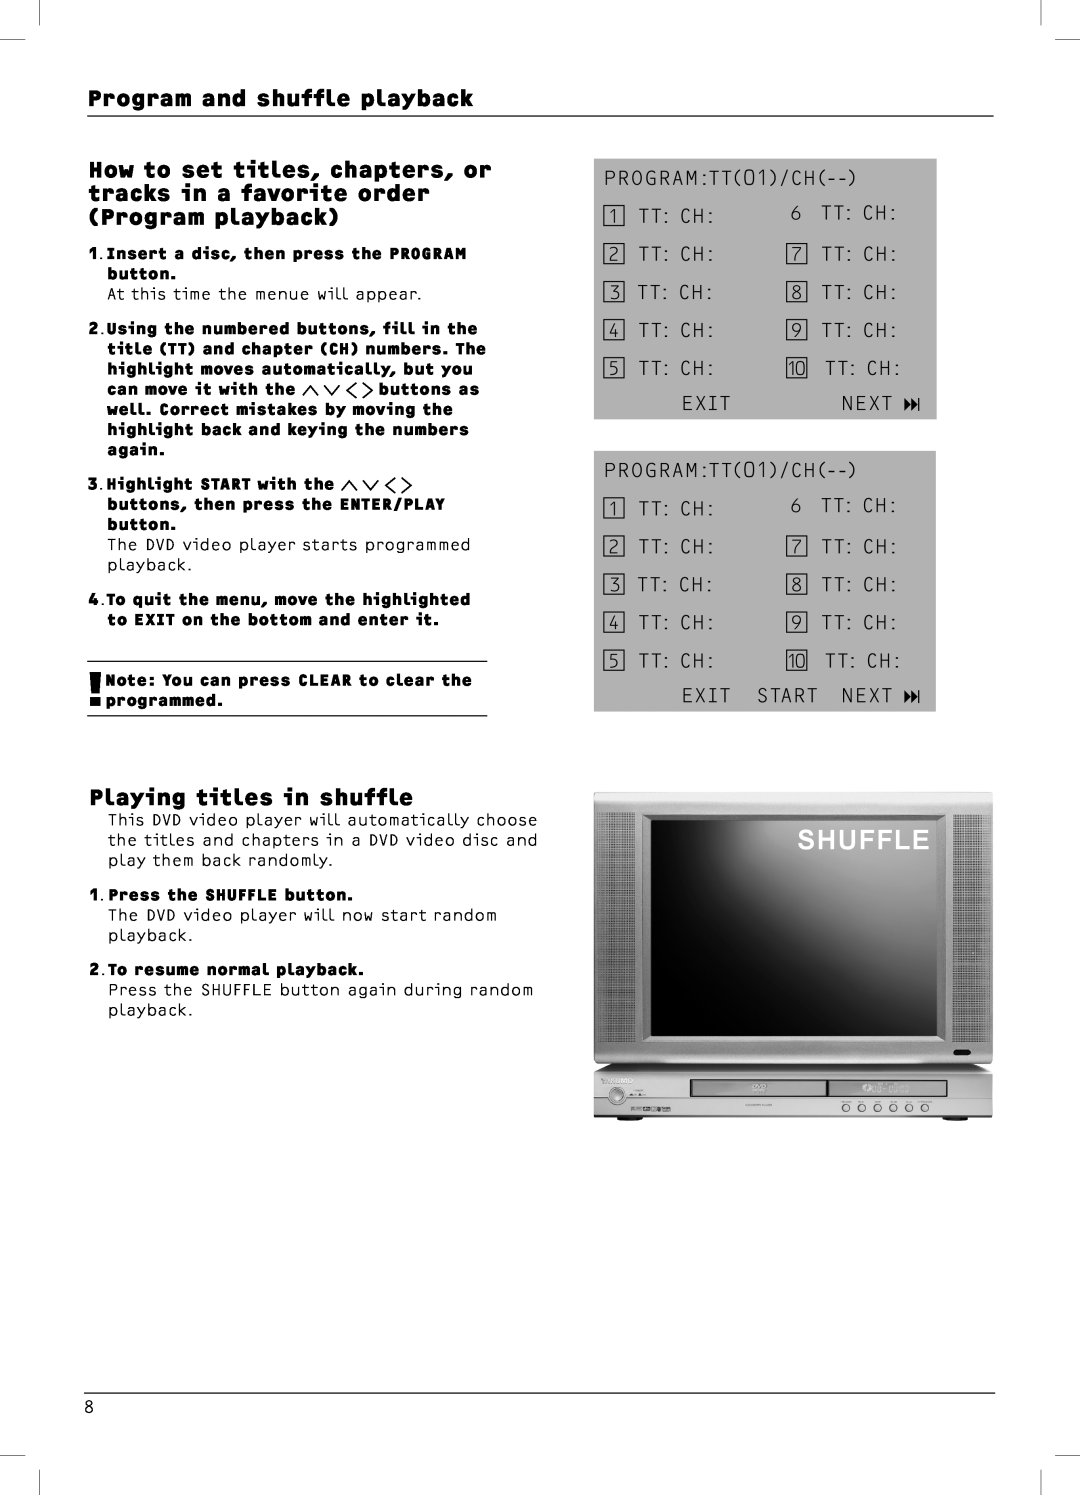 Dolby Laboratories DX4 manual Program and shuffle playback, Playing titles in shuffle, Shuffle 